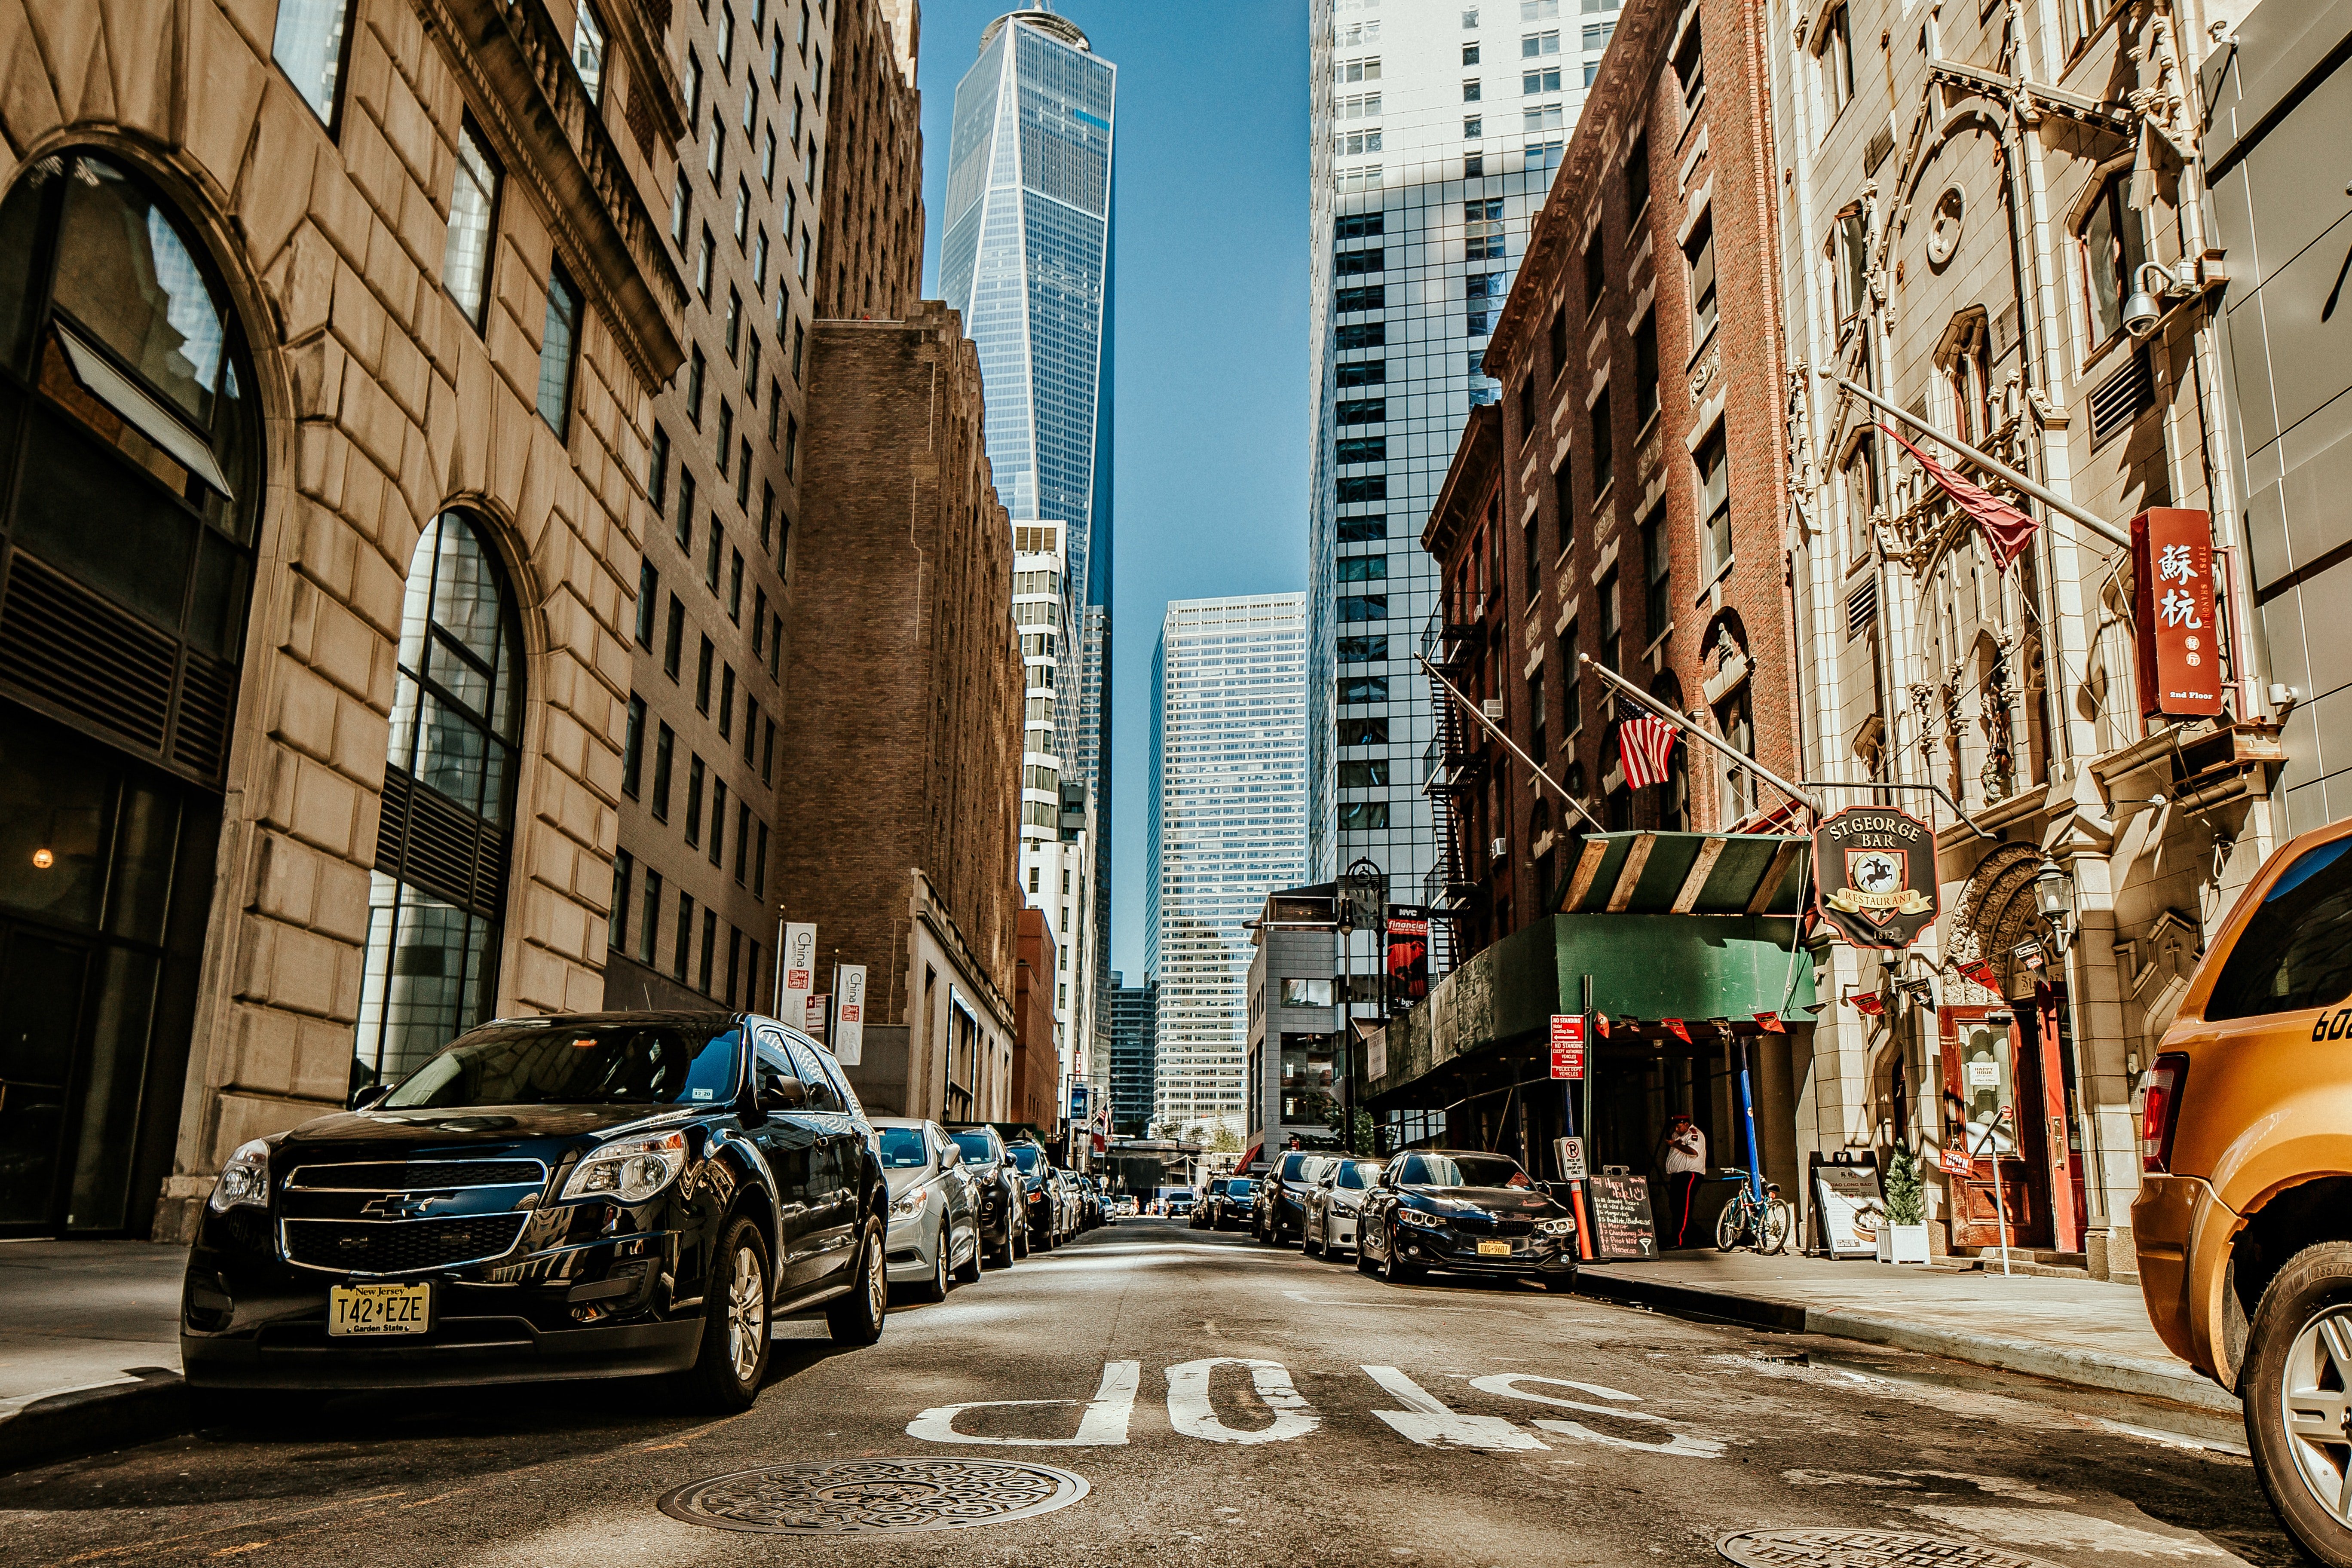 Martha thought New York had lost its grandeur due to homeless people on the streets. | Photo: Pexels